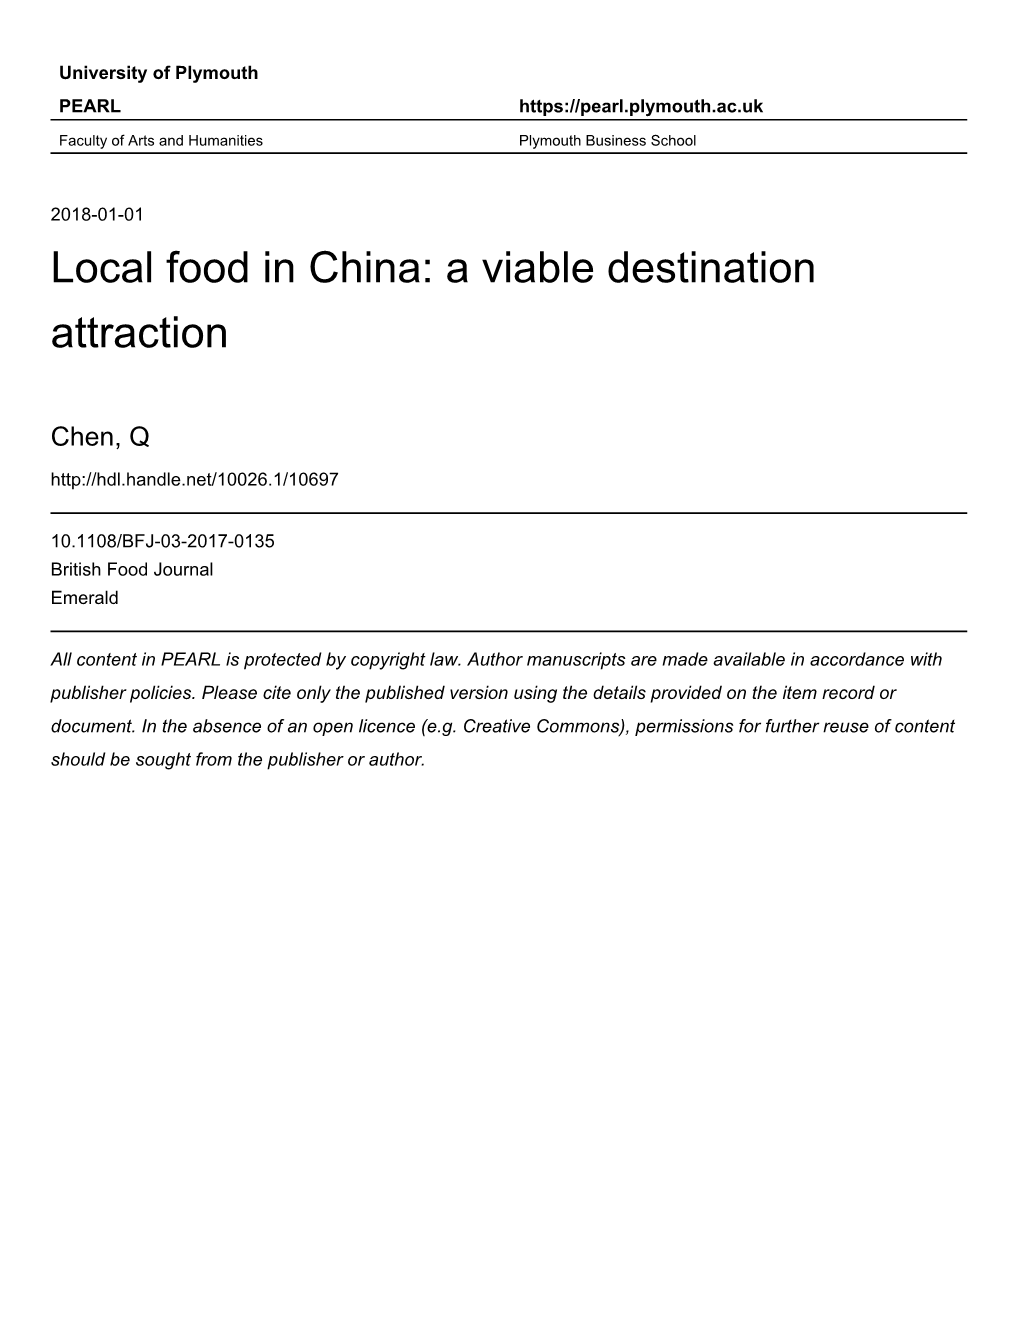 Local Food in China: a Viable Destination Attraction Abstract Purpose the Subject of Food Has Been Well Researched by Academics